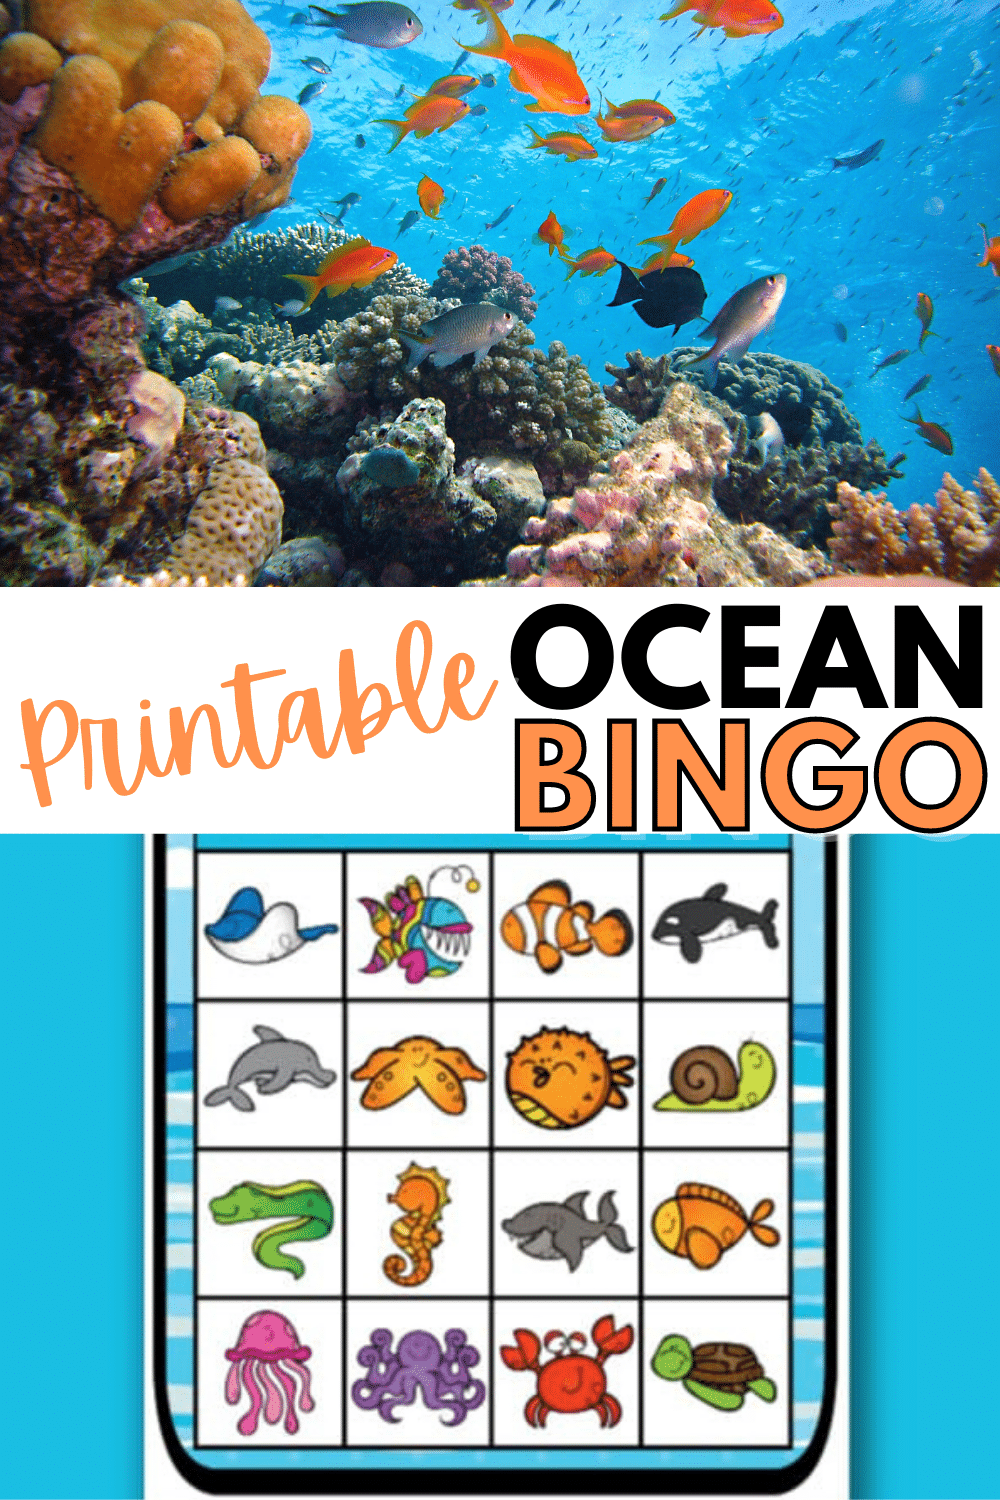 This printable ocean bingo game is great for tropical themed parties. Six unique bingo cards make this a great kids activity. #bingo #printables #ocean via @wondermomwannab